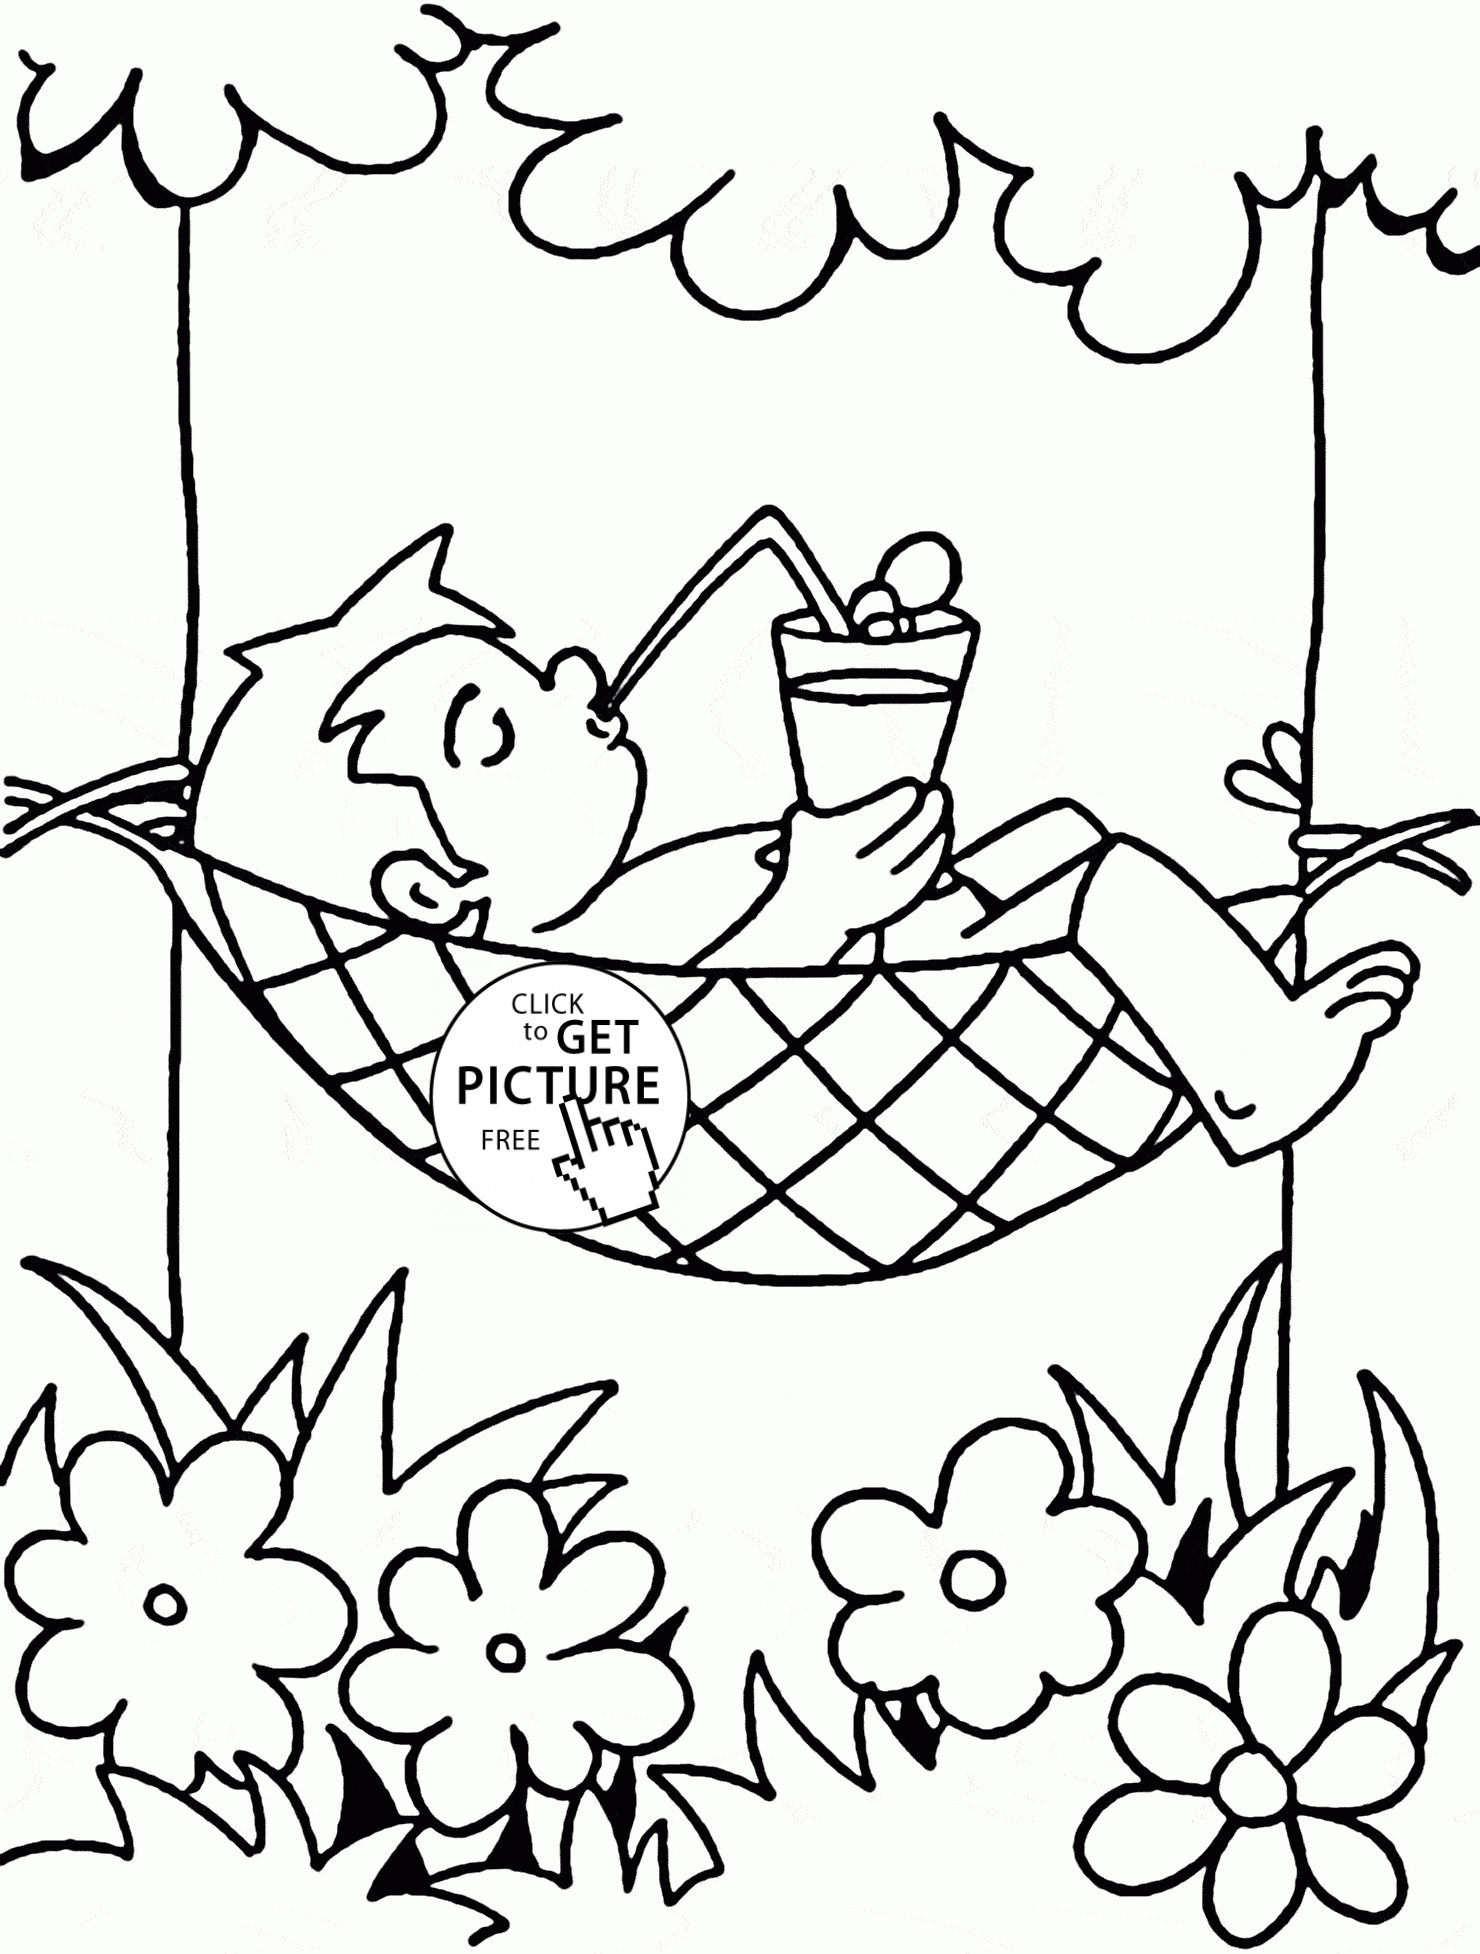 Daylight Savings Time Coloring Pages at GetColorings.com ...